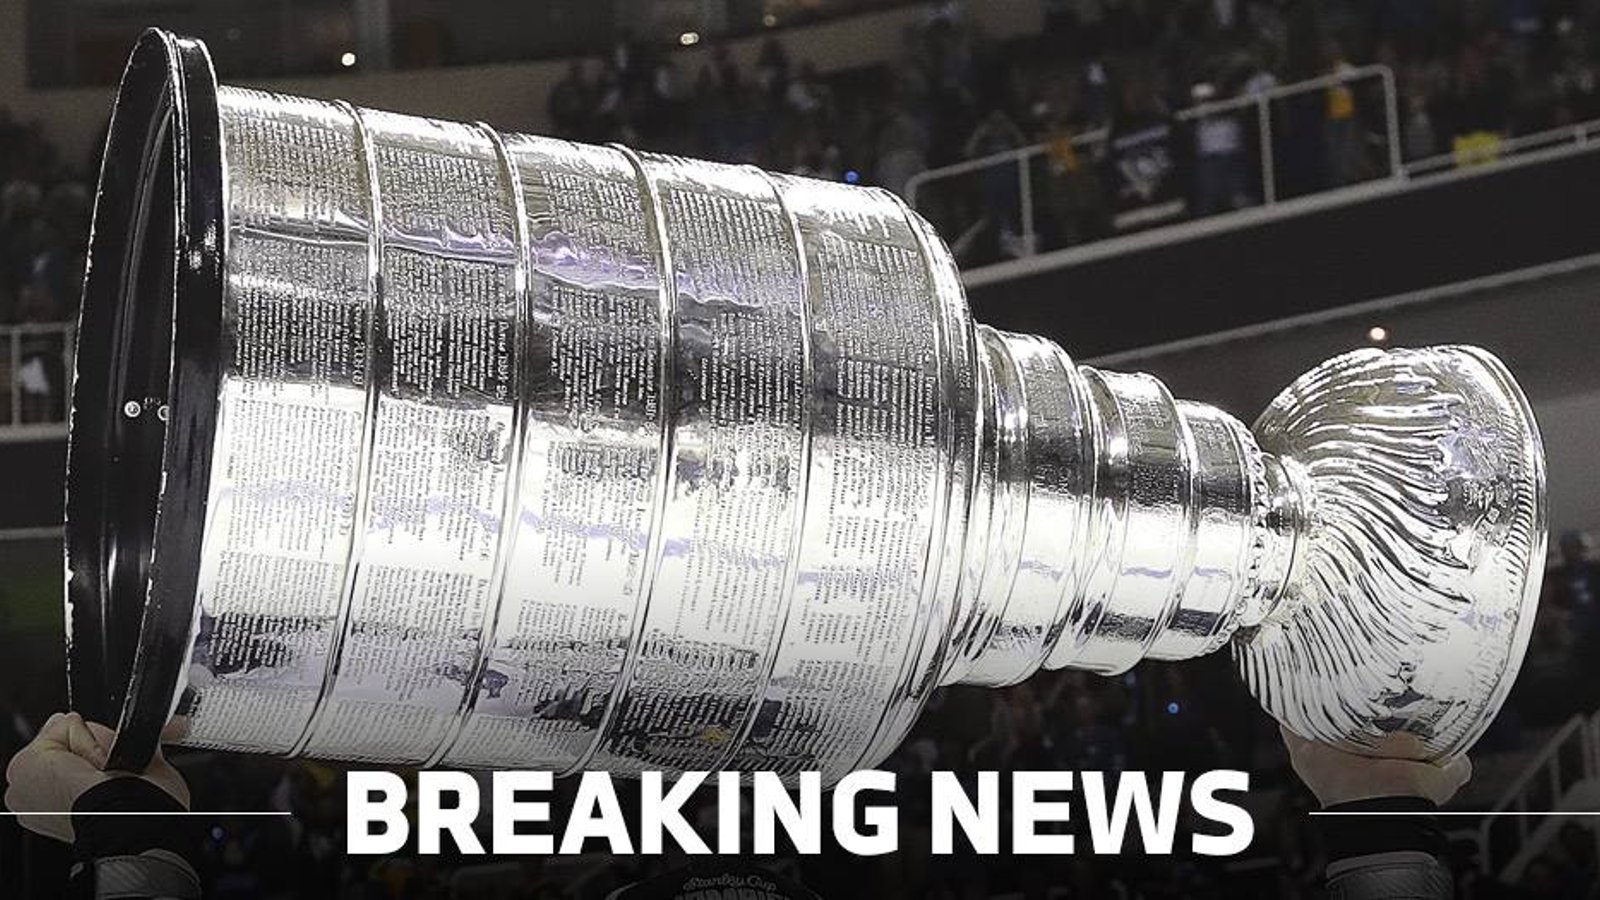 Breaking: Controversy arises around NHL coach being fired.